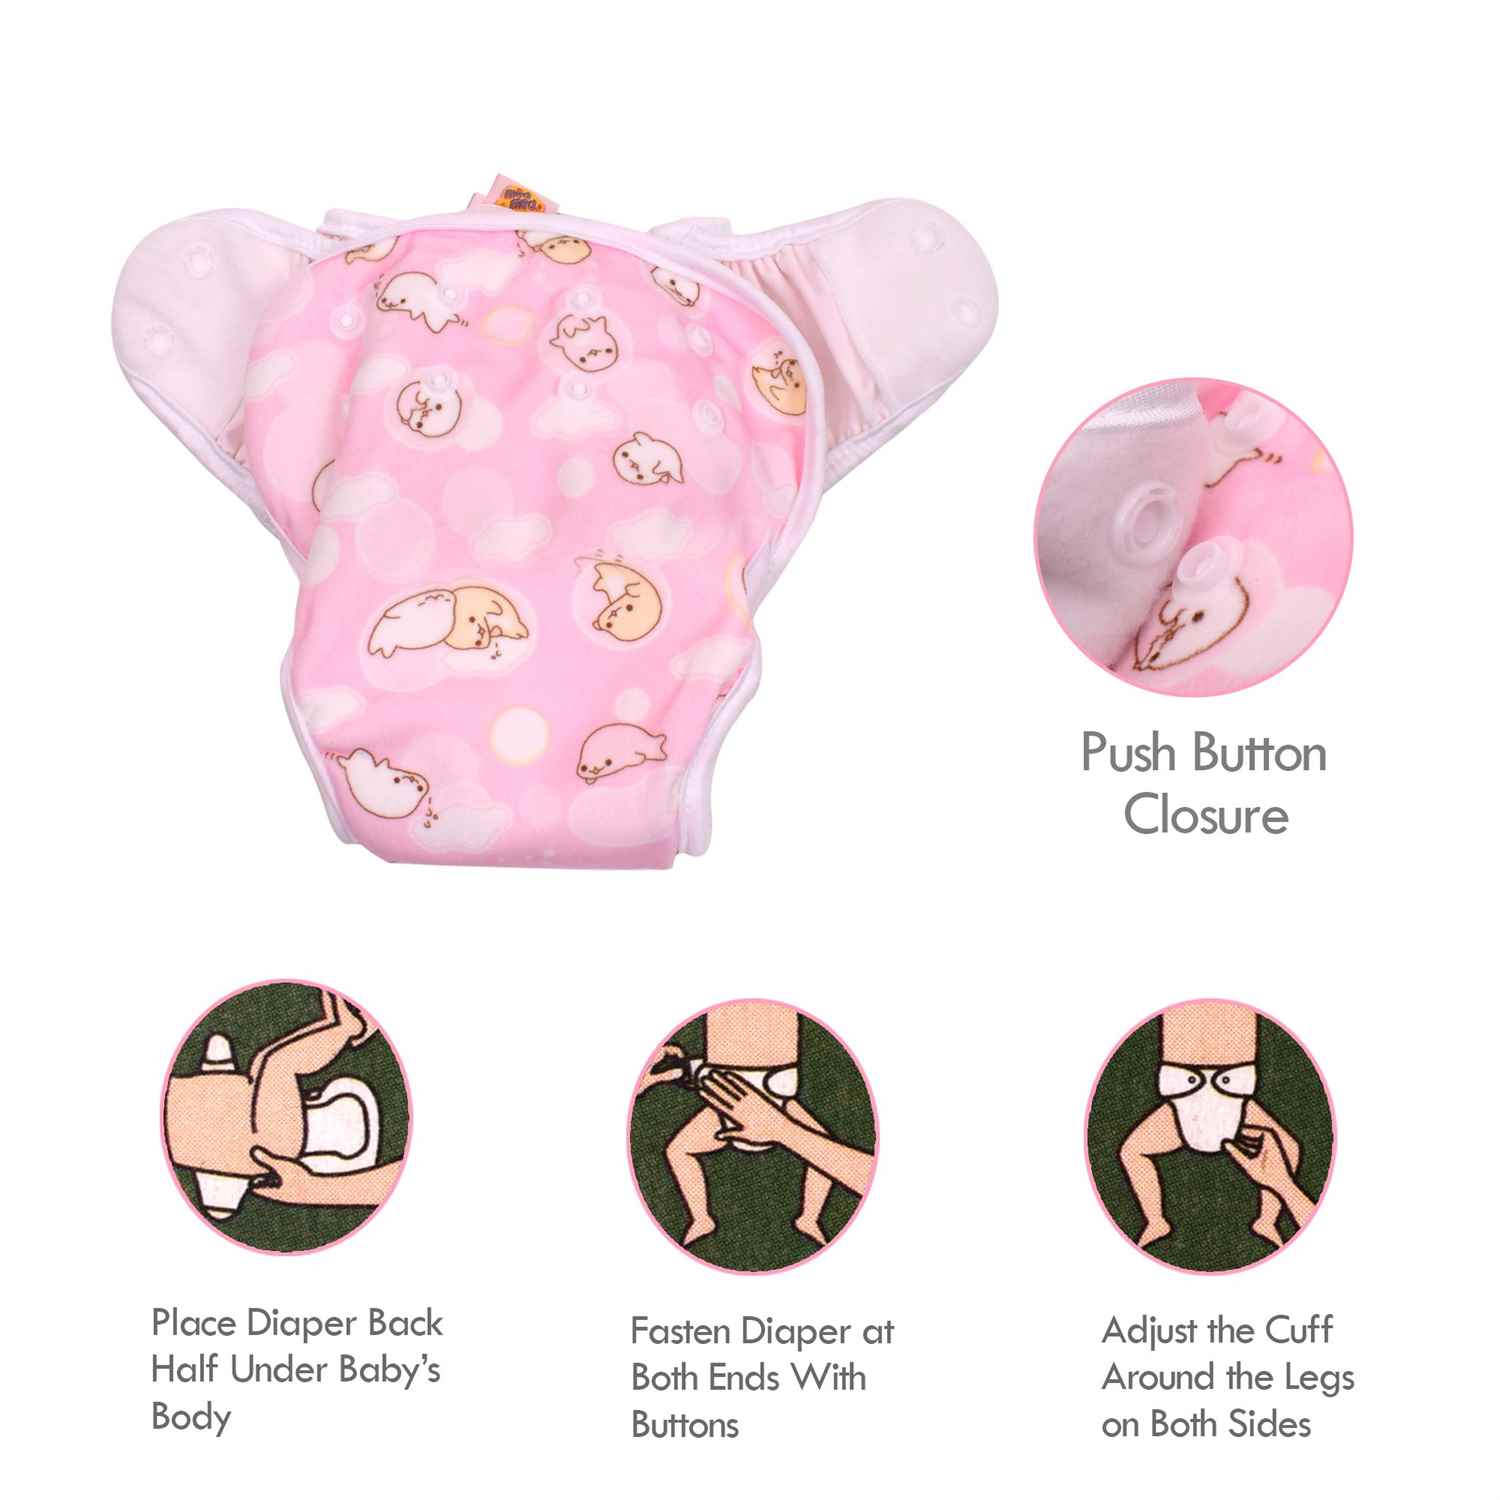 PAW PAW Baby Reusable Fabric Diaper with Pad, Size S (3-6kg)-Pink